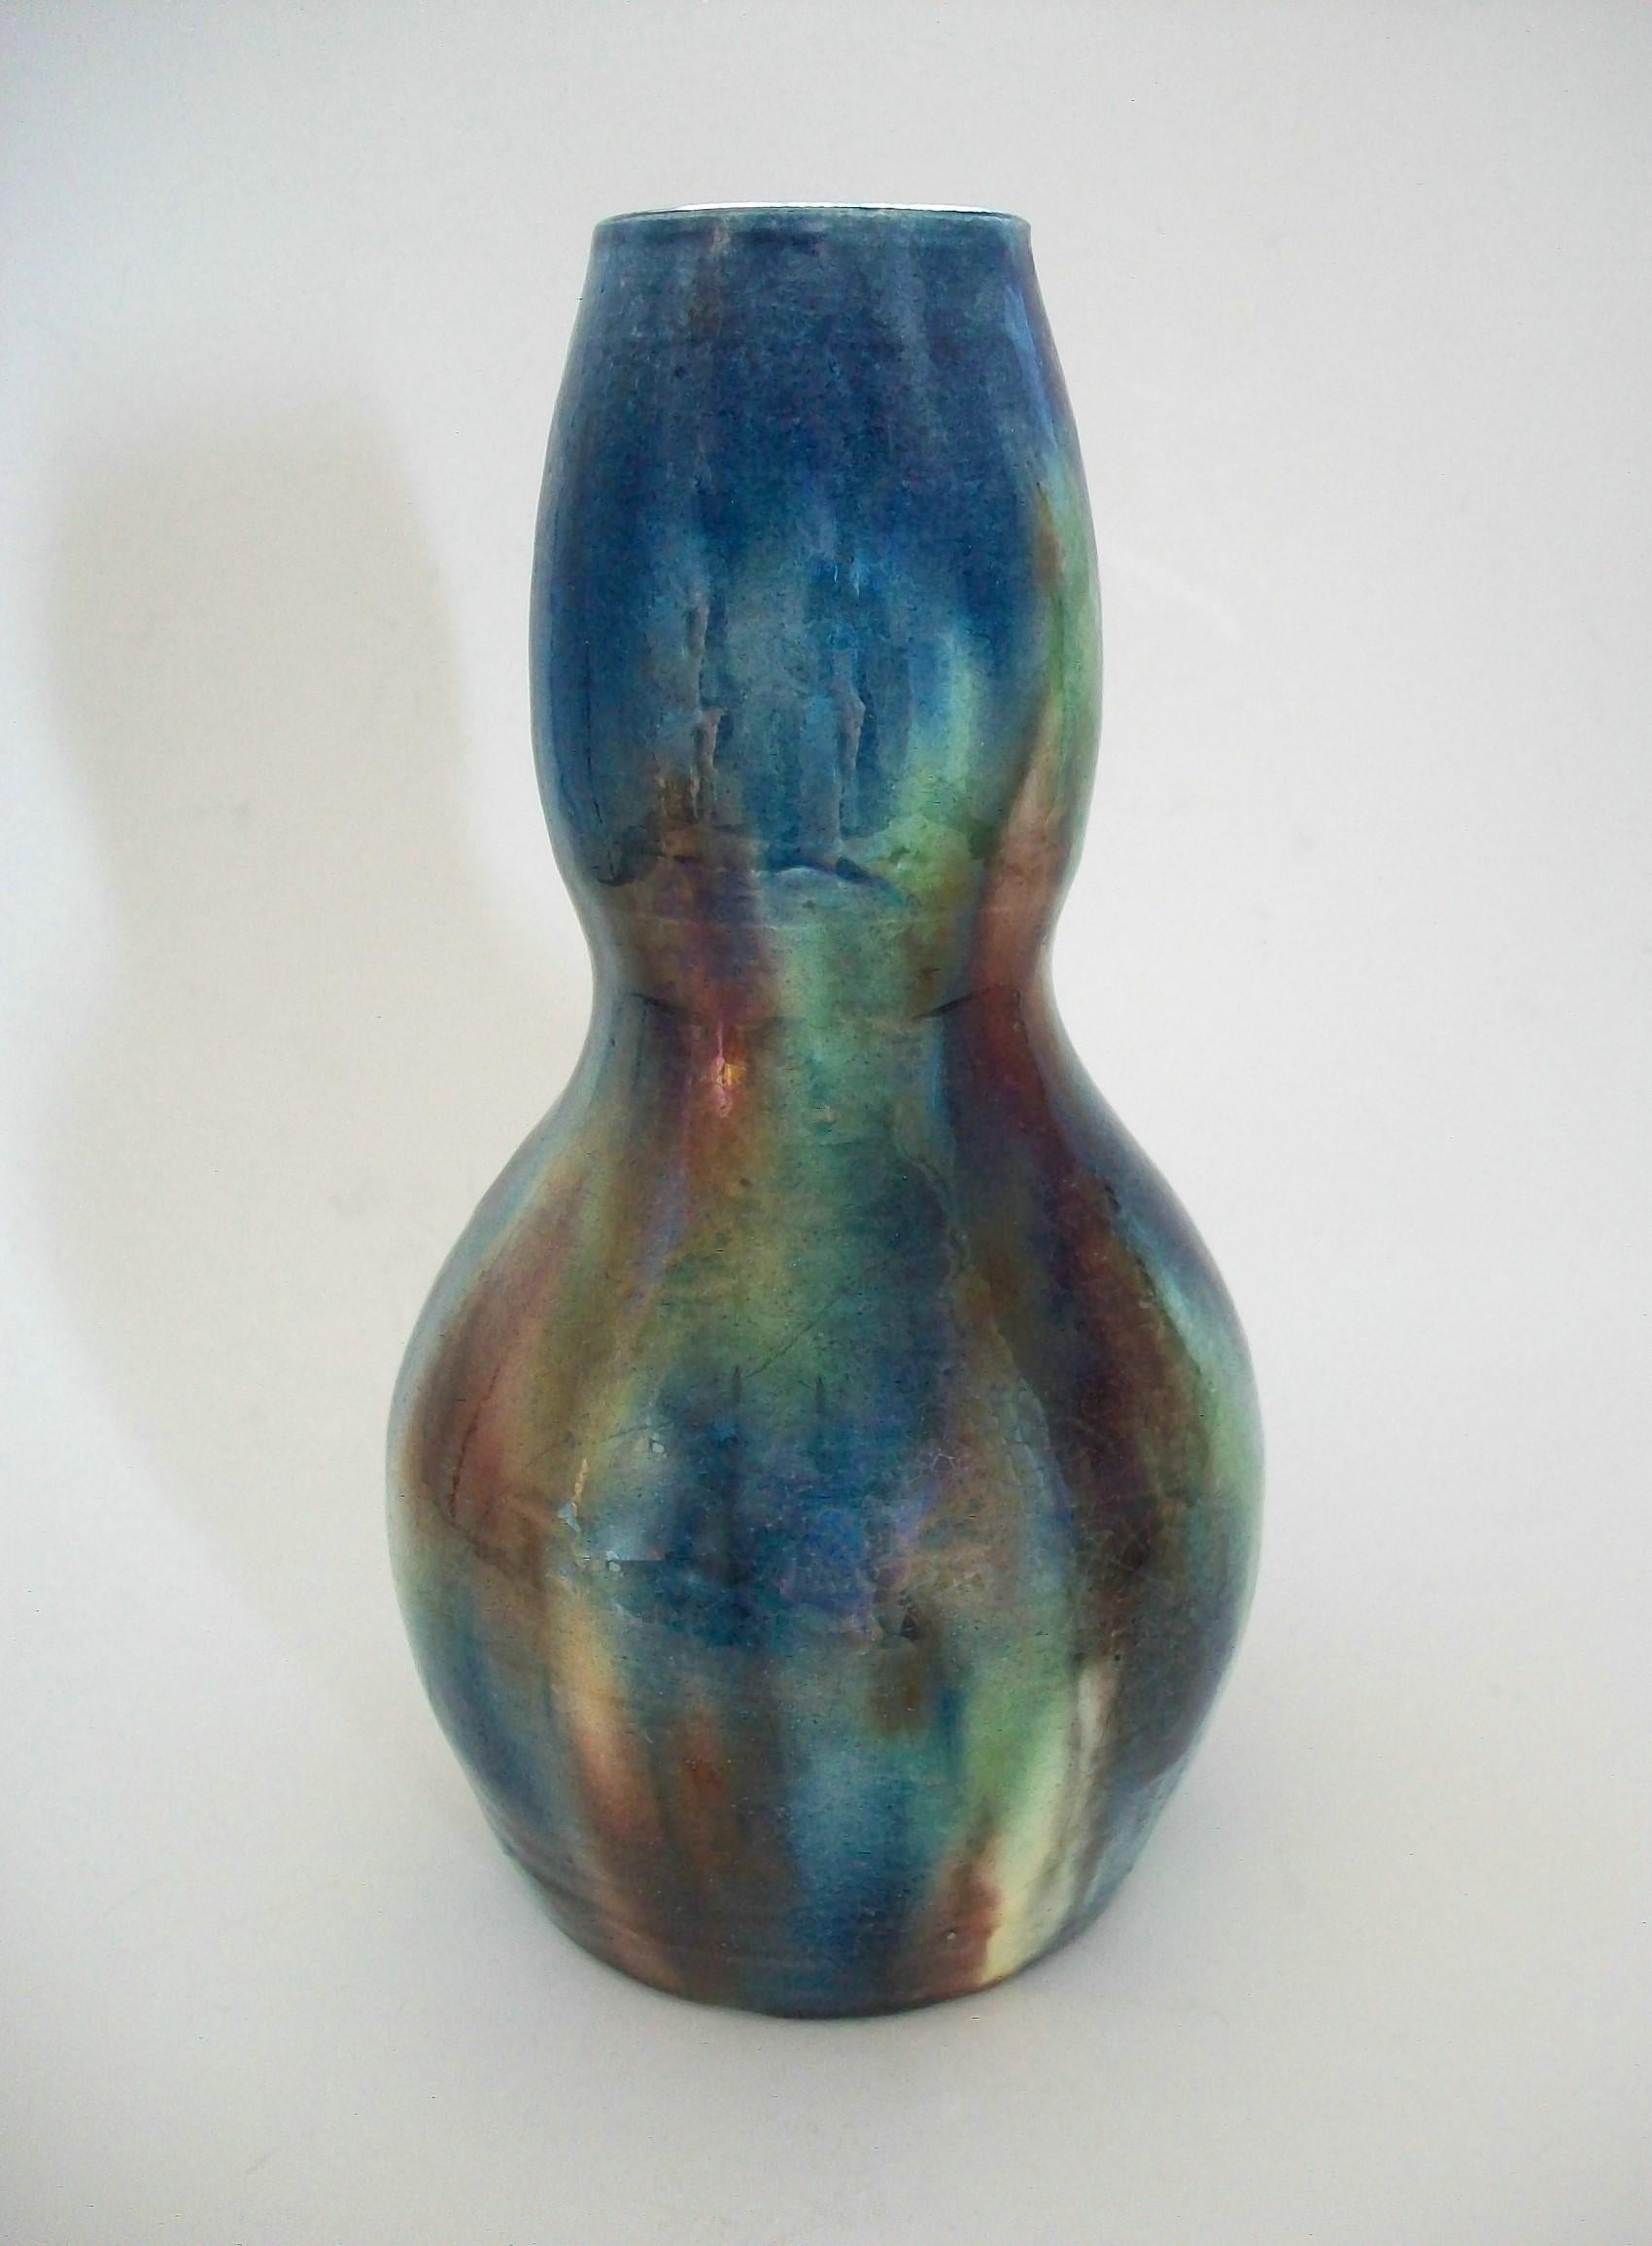 Art Nouveau double gourd studio pottery vase - featuring multi-color splashed glazes with an iridescent finish - all on a cream ceramic ground - wheel thrown - unsigned - inscribed C to the base - Belgium - early 20th century.

Excellent antique